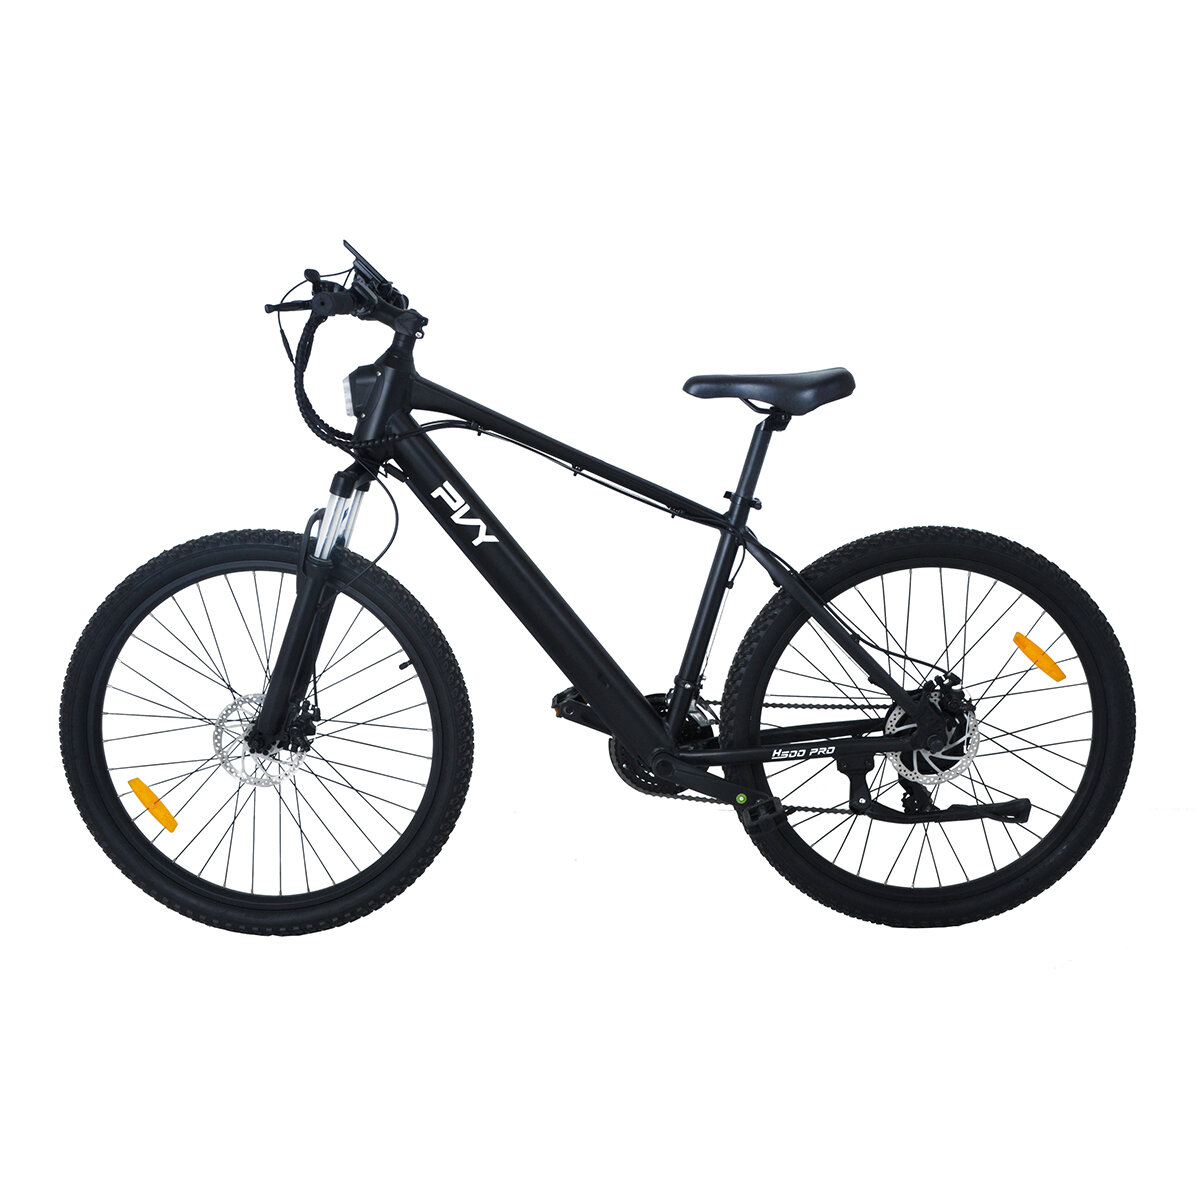 best price,pvy,h500,36v,10.4ah,350w,27.5inch,electric,bicycle,eu,discount